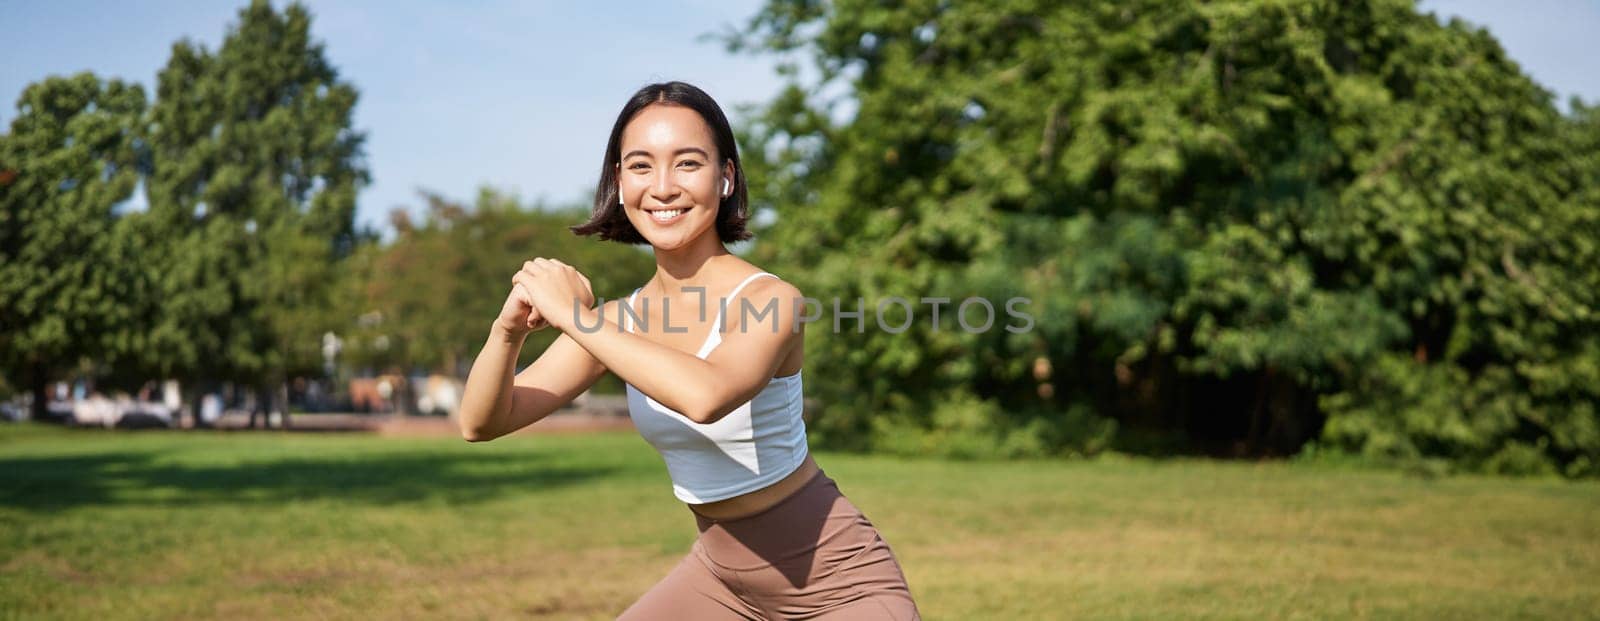 Wellbeing and sport complex. Young asian woman stretching, doing squats and workout on fresh air, smiling pleased.